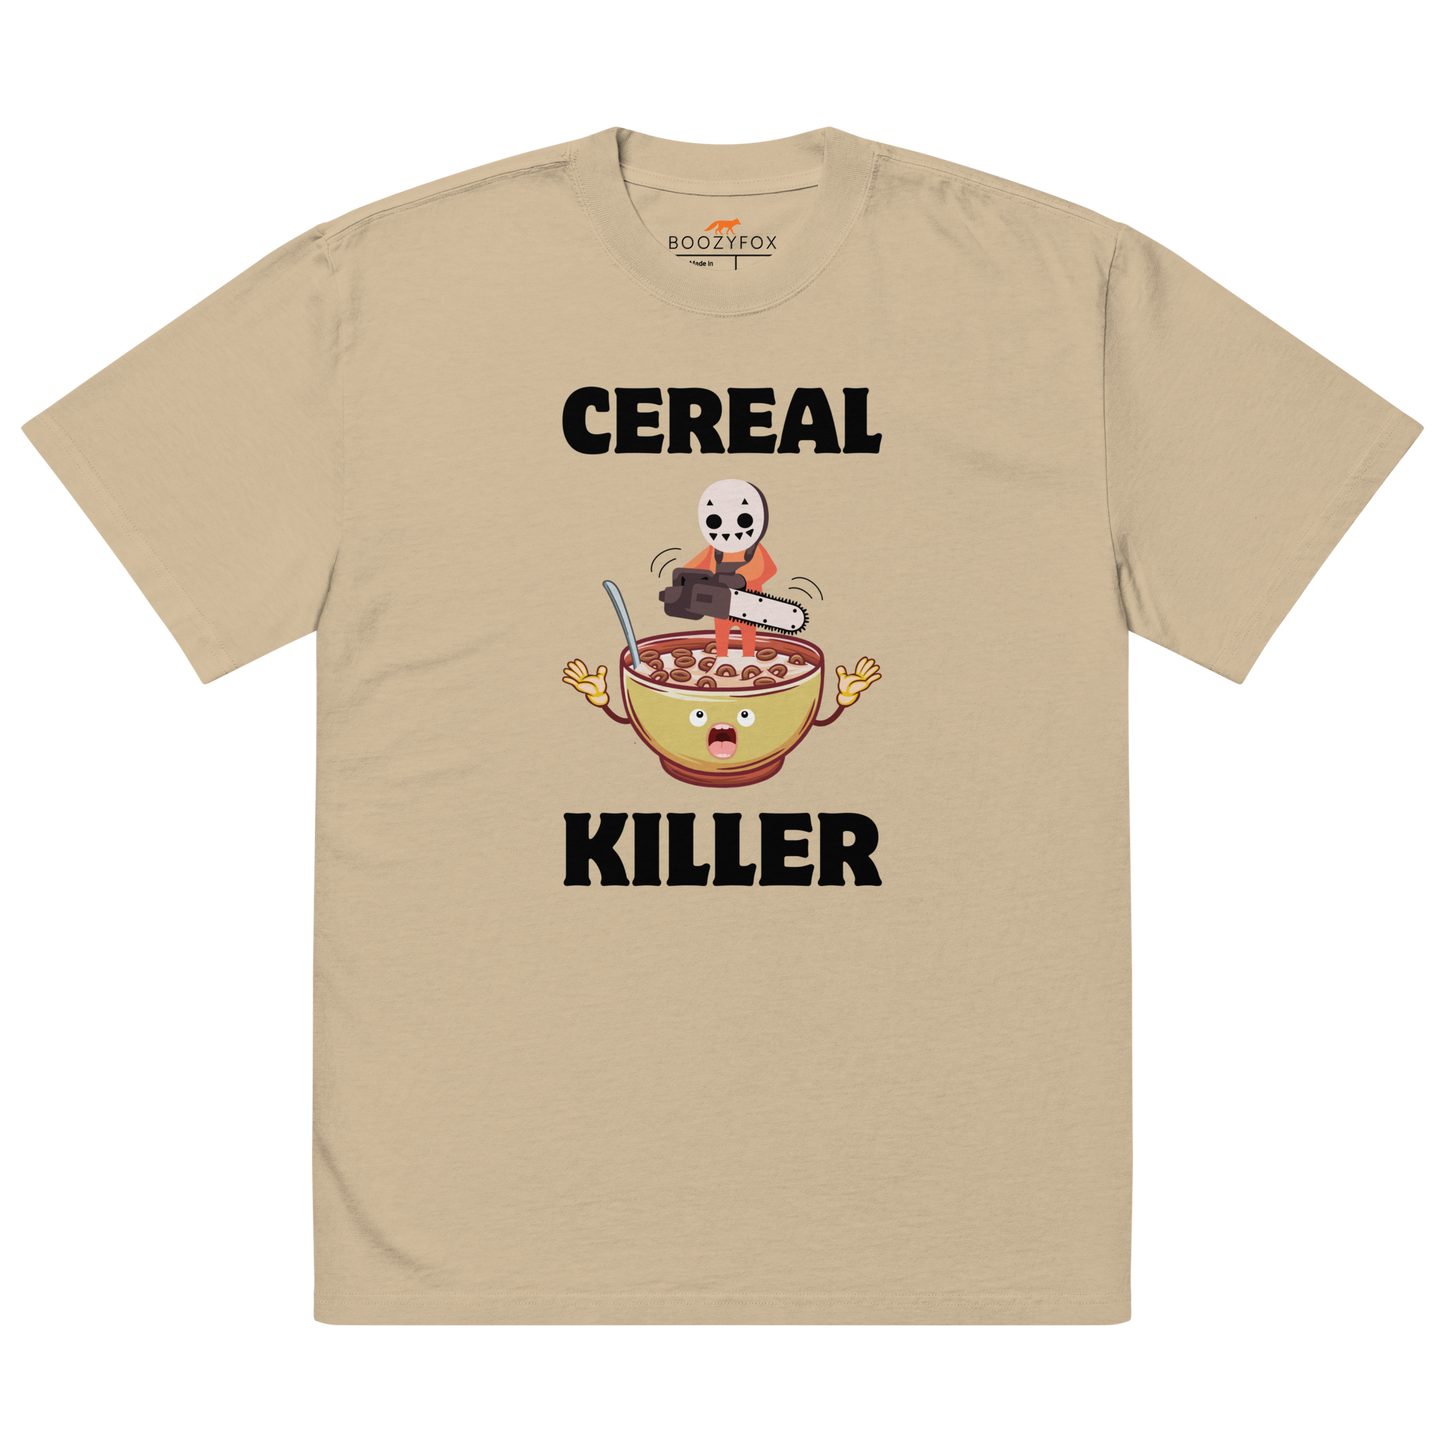 Faded Khaki Cereal Killer Oversized T-Shirt featuring a Cereal Killer graphic on the chest - Funny Graphic Oversized Tees - Boozy Fox